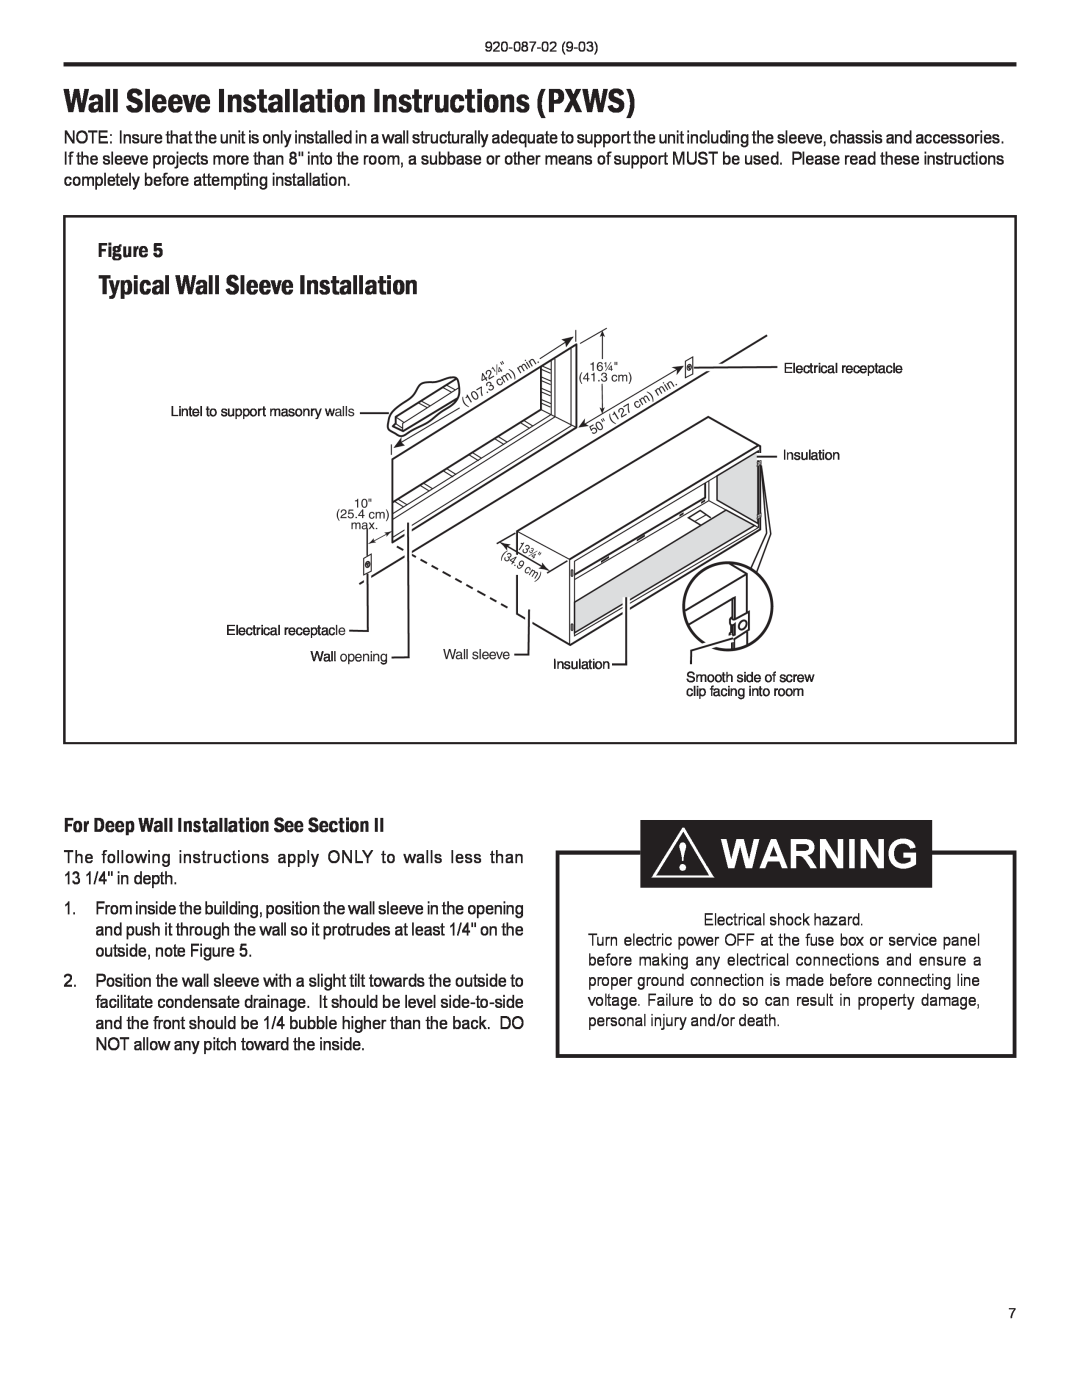 Friedrich PTAC operation manual Wall Sleeve Installation Instructions PXWS, Typical Wall Sleeve Installation 